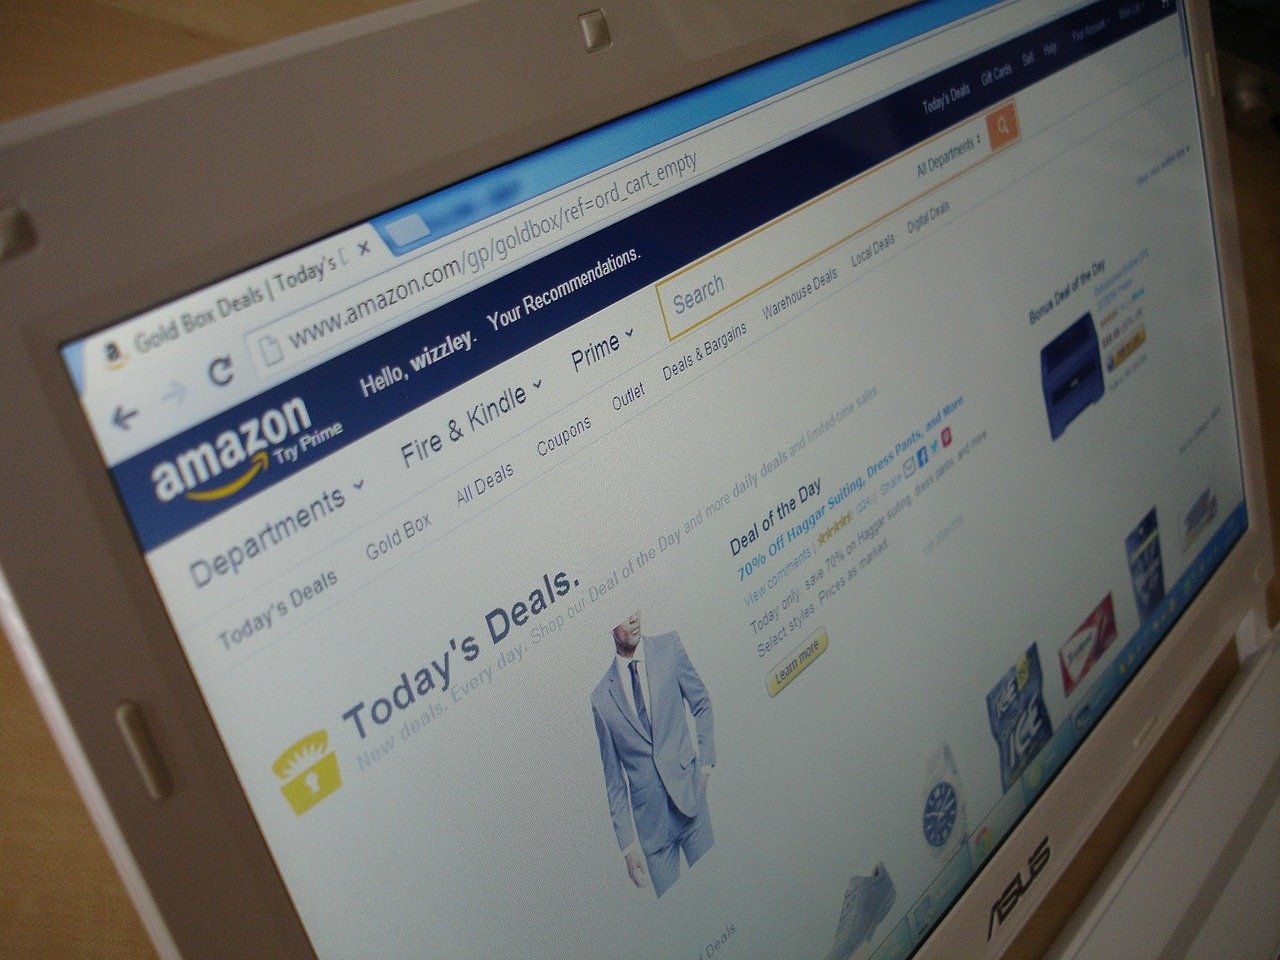 India government proposes new consumer protection rules for e-commerce platforms